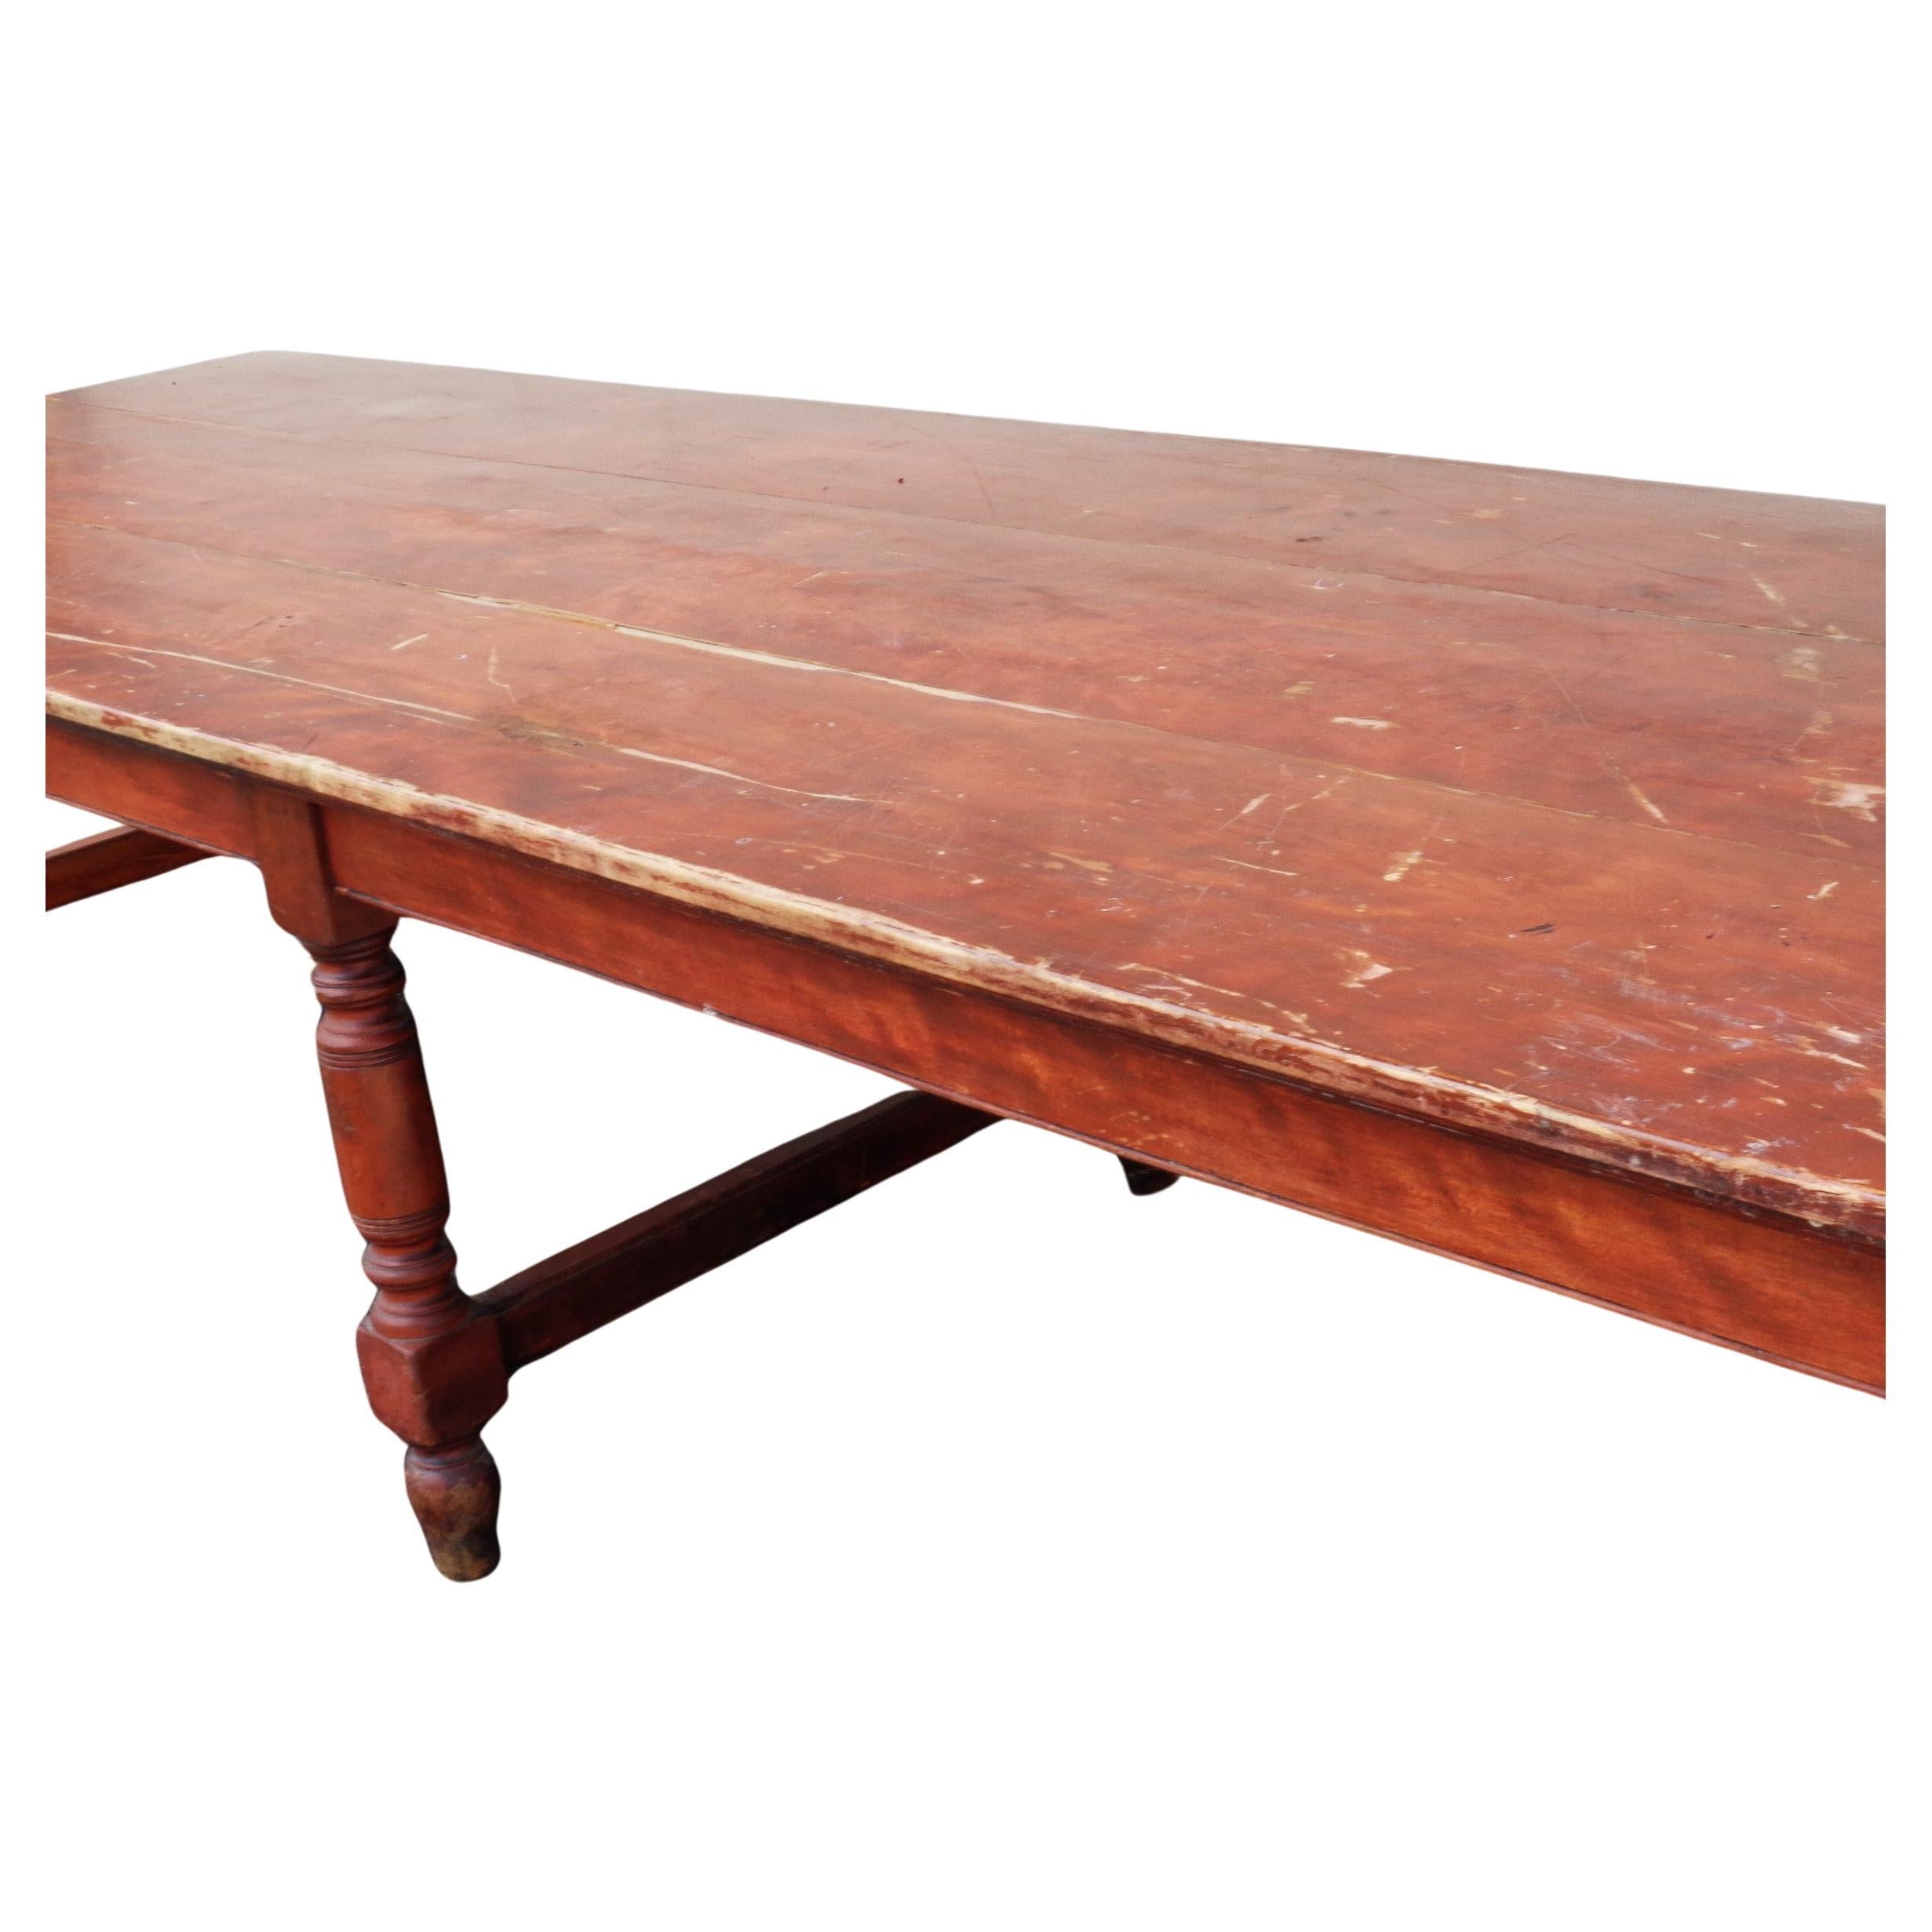 Maple Antique American Banquet Dining Table, 1870-1880 For Sale